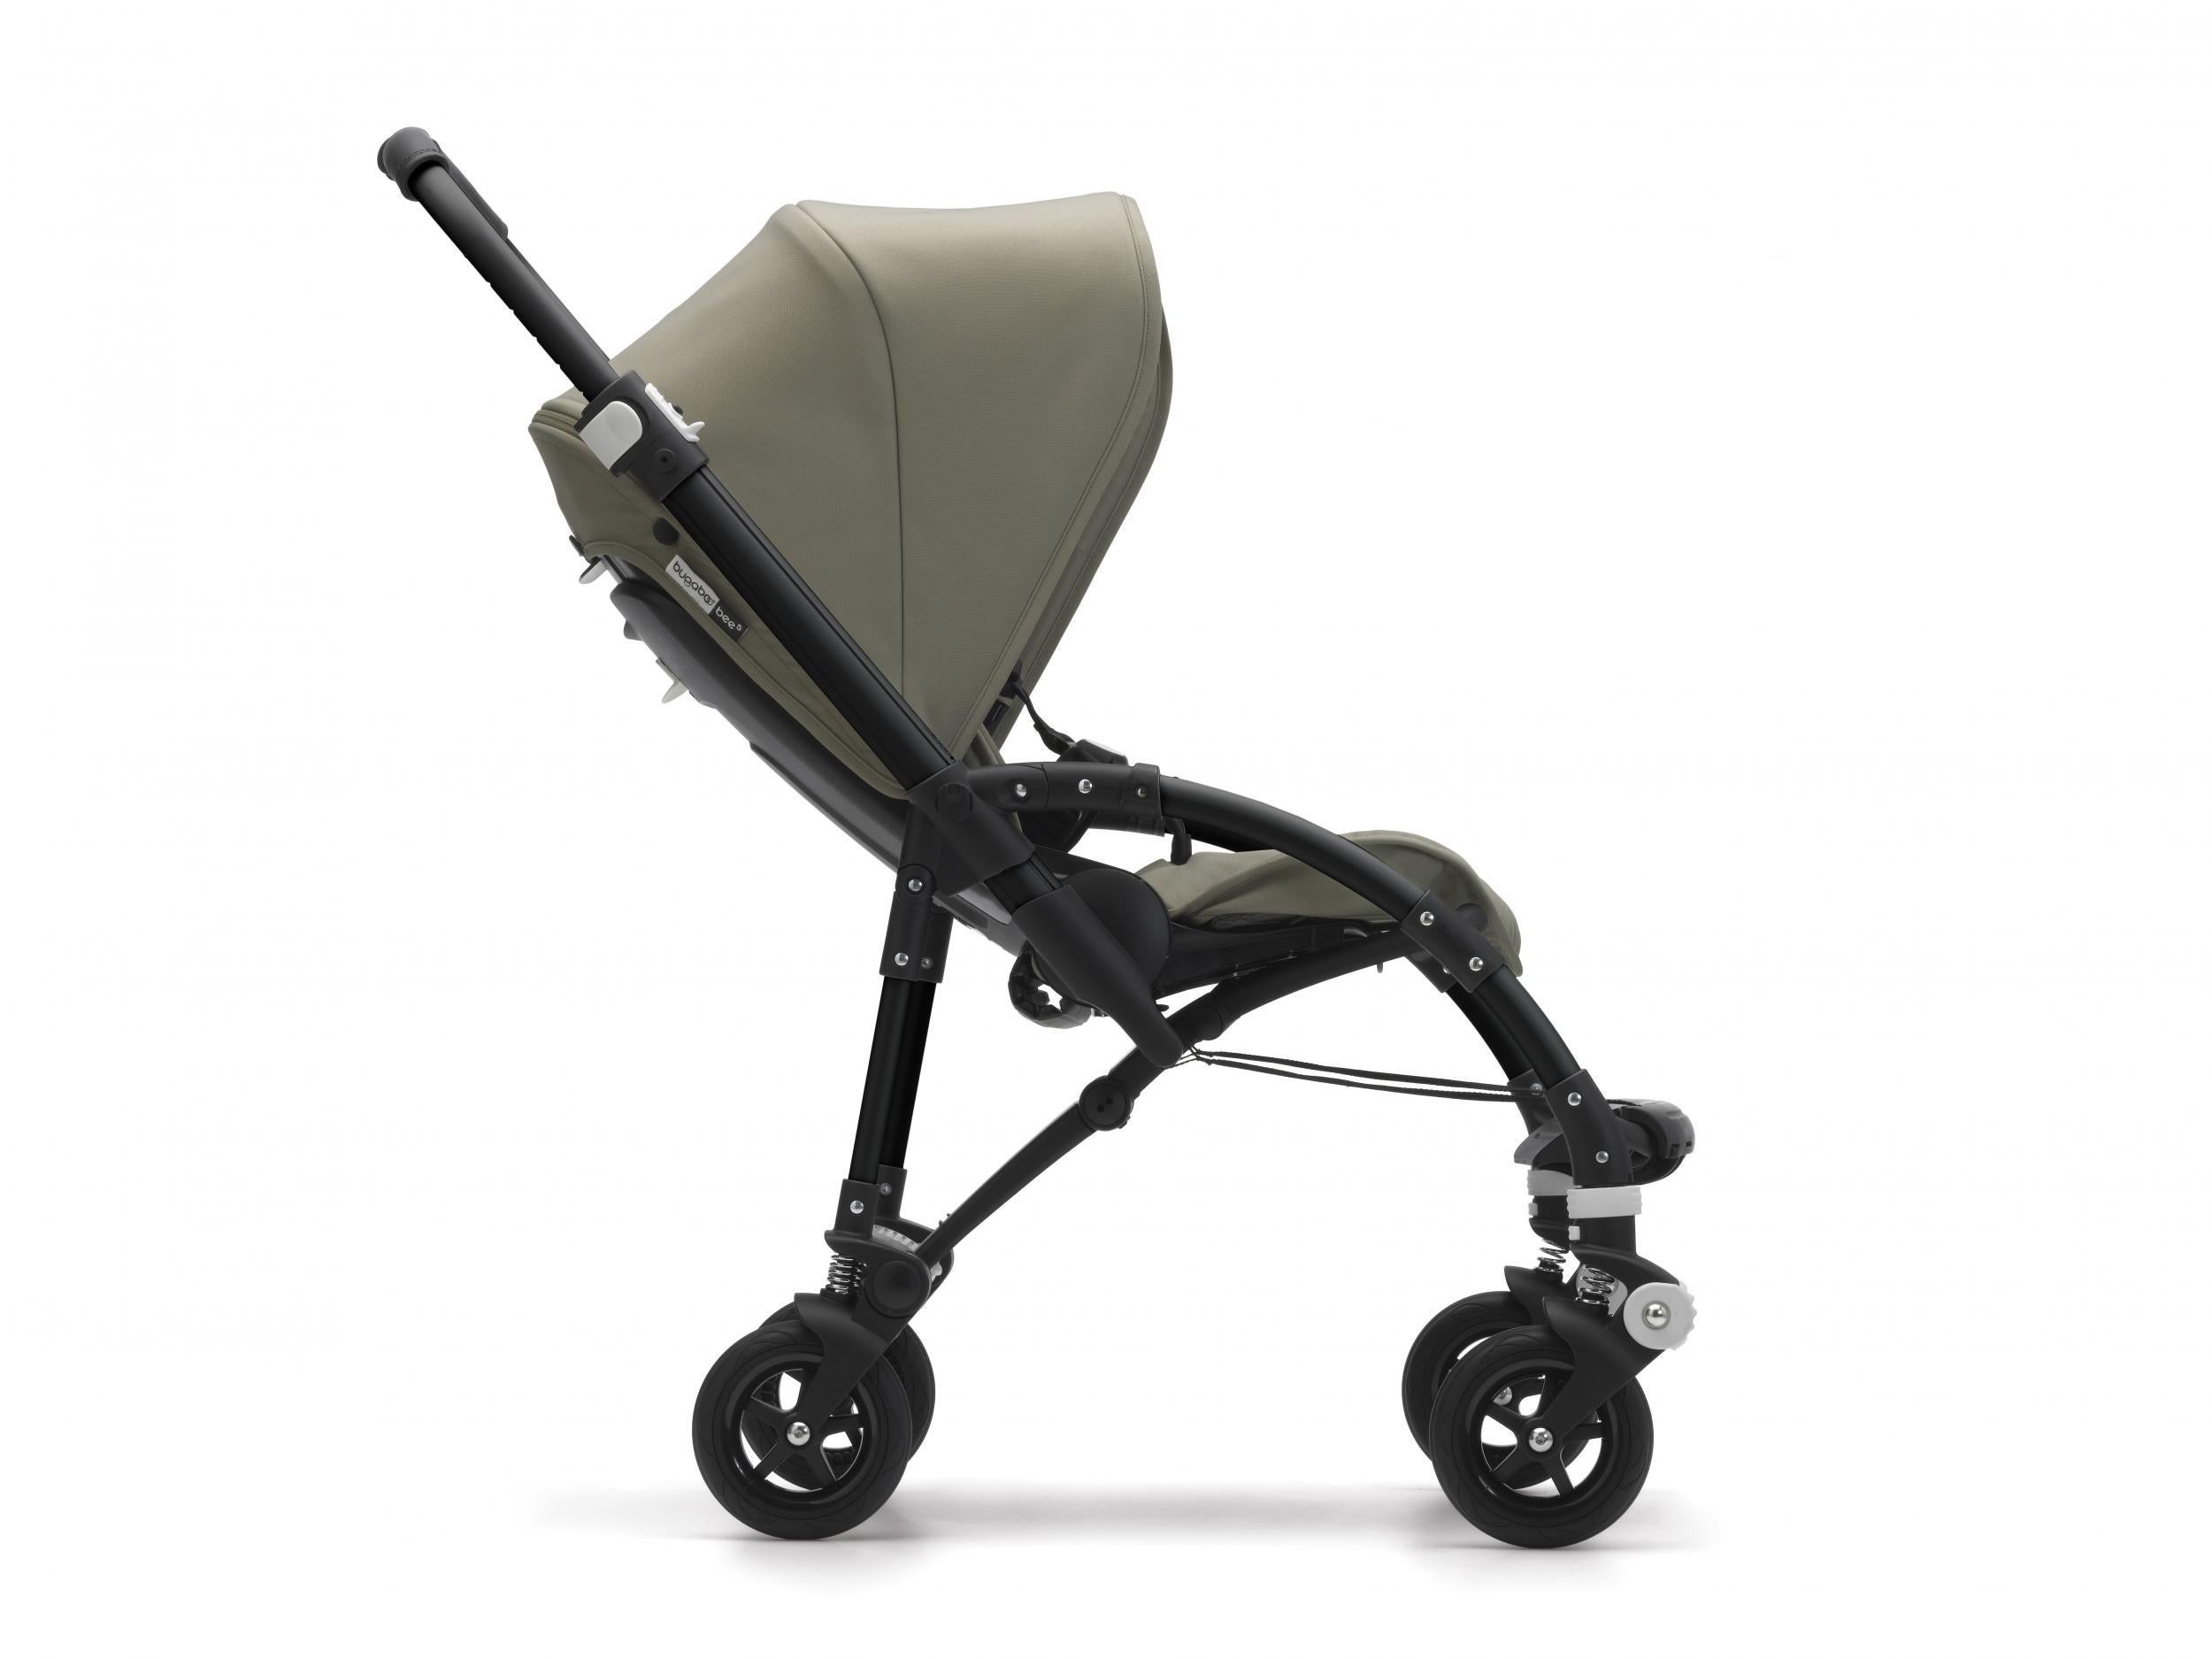 pram and pushchair in one